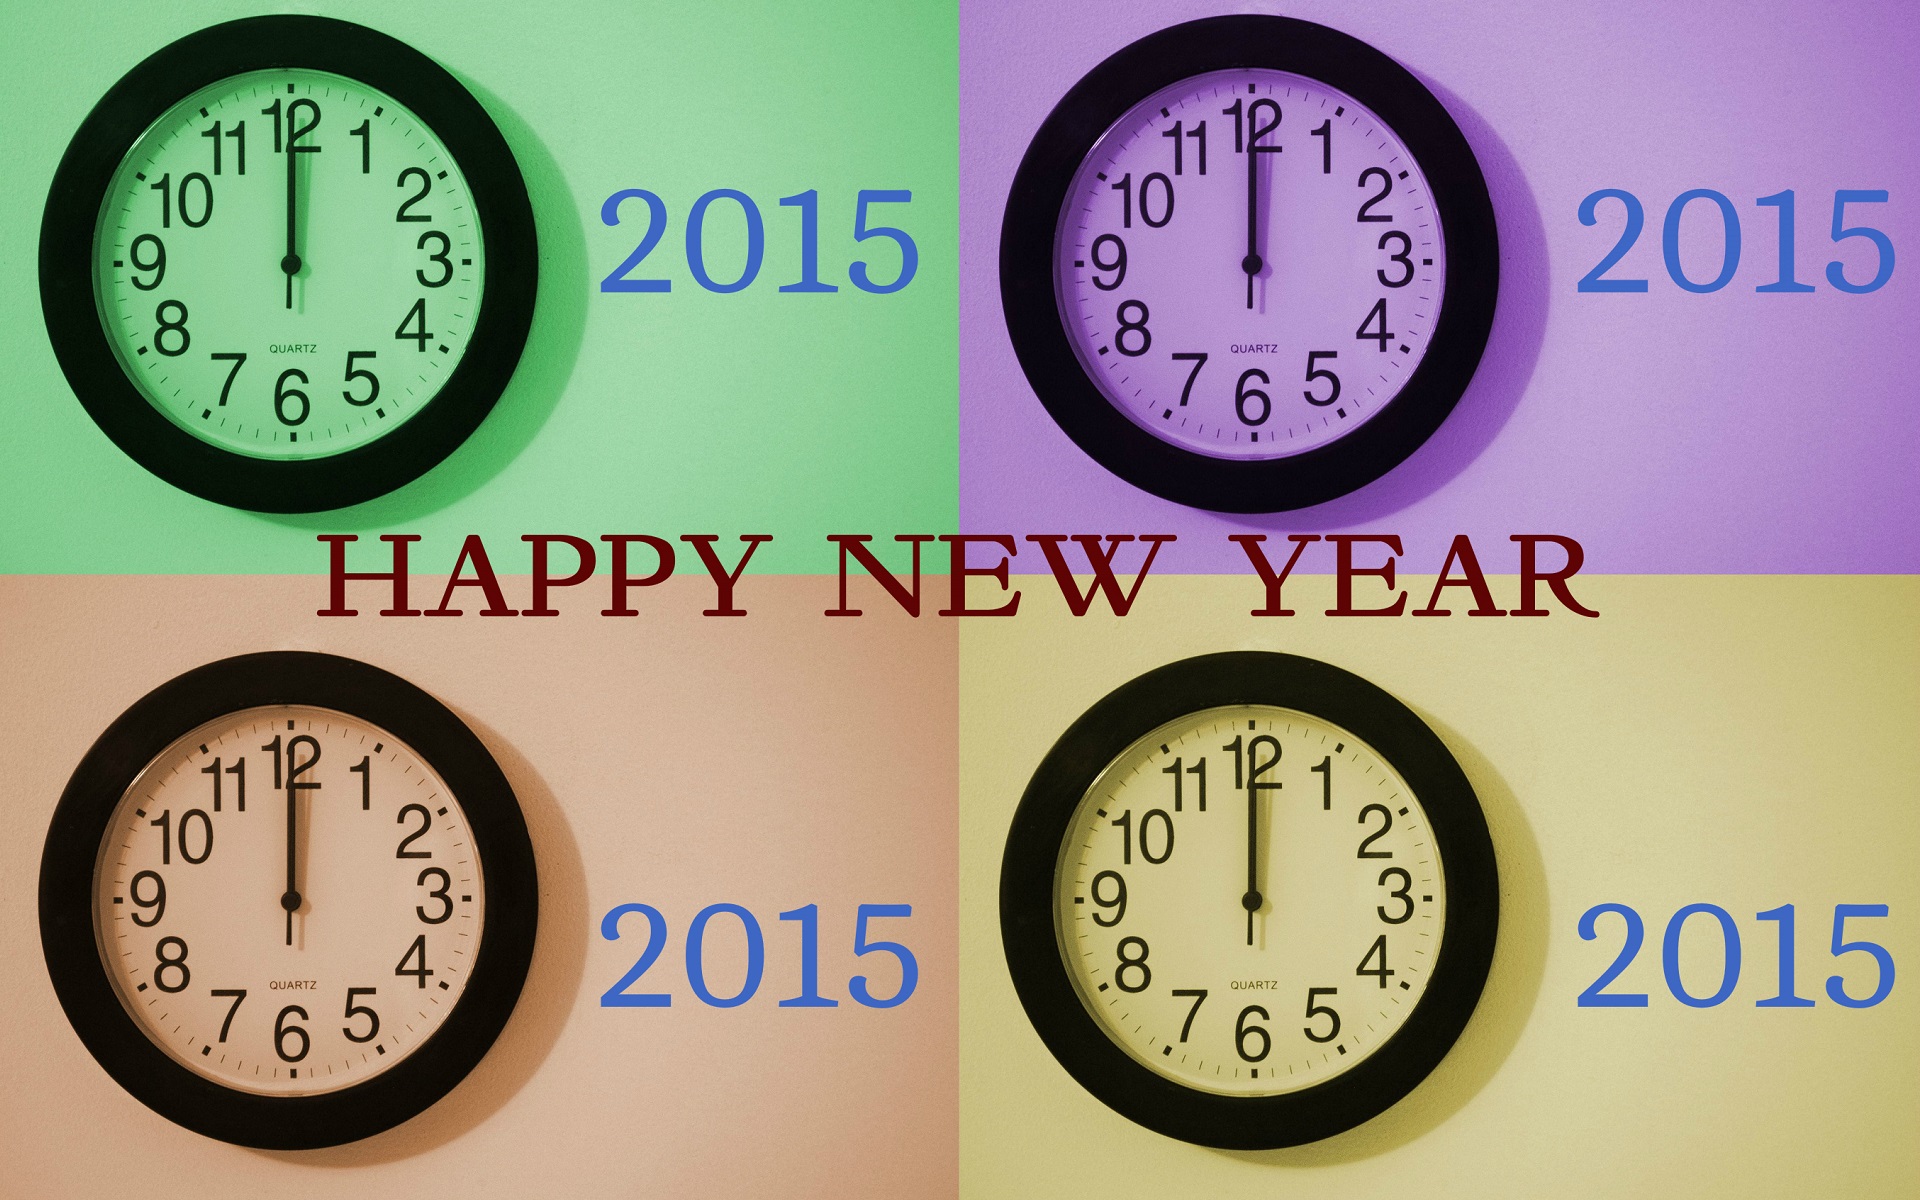 holiday, new year 2015, celebration, clock, new year, number, party, pop art